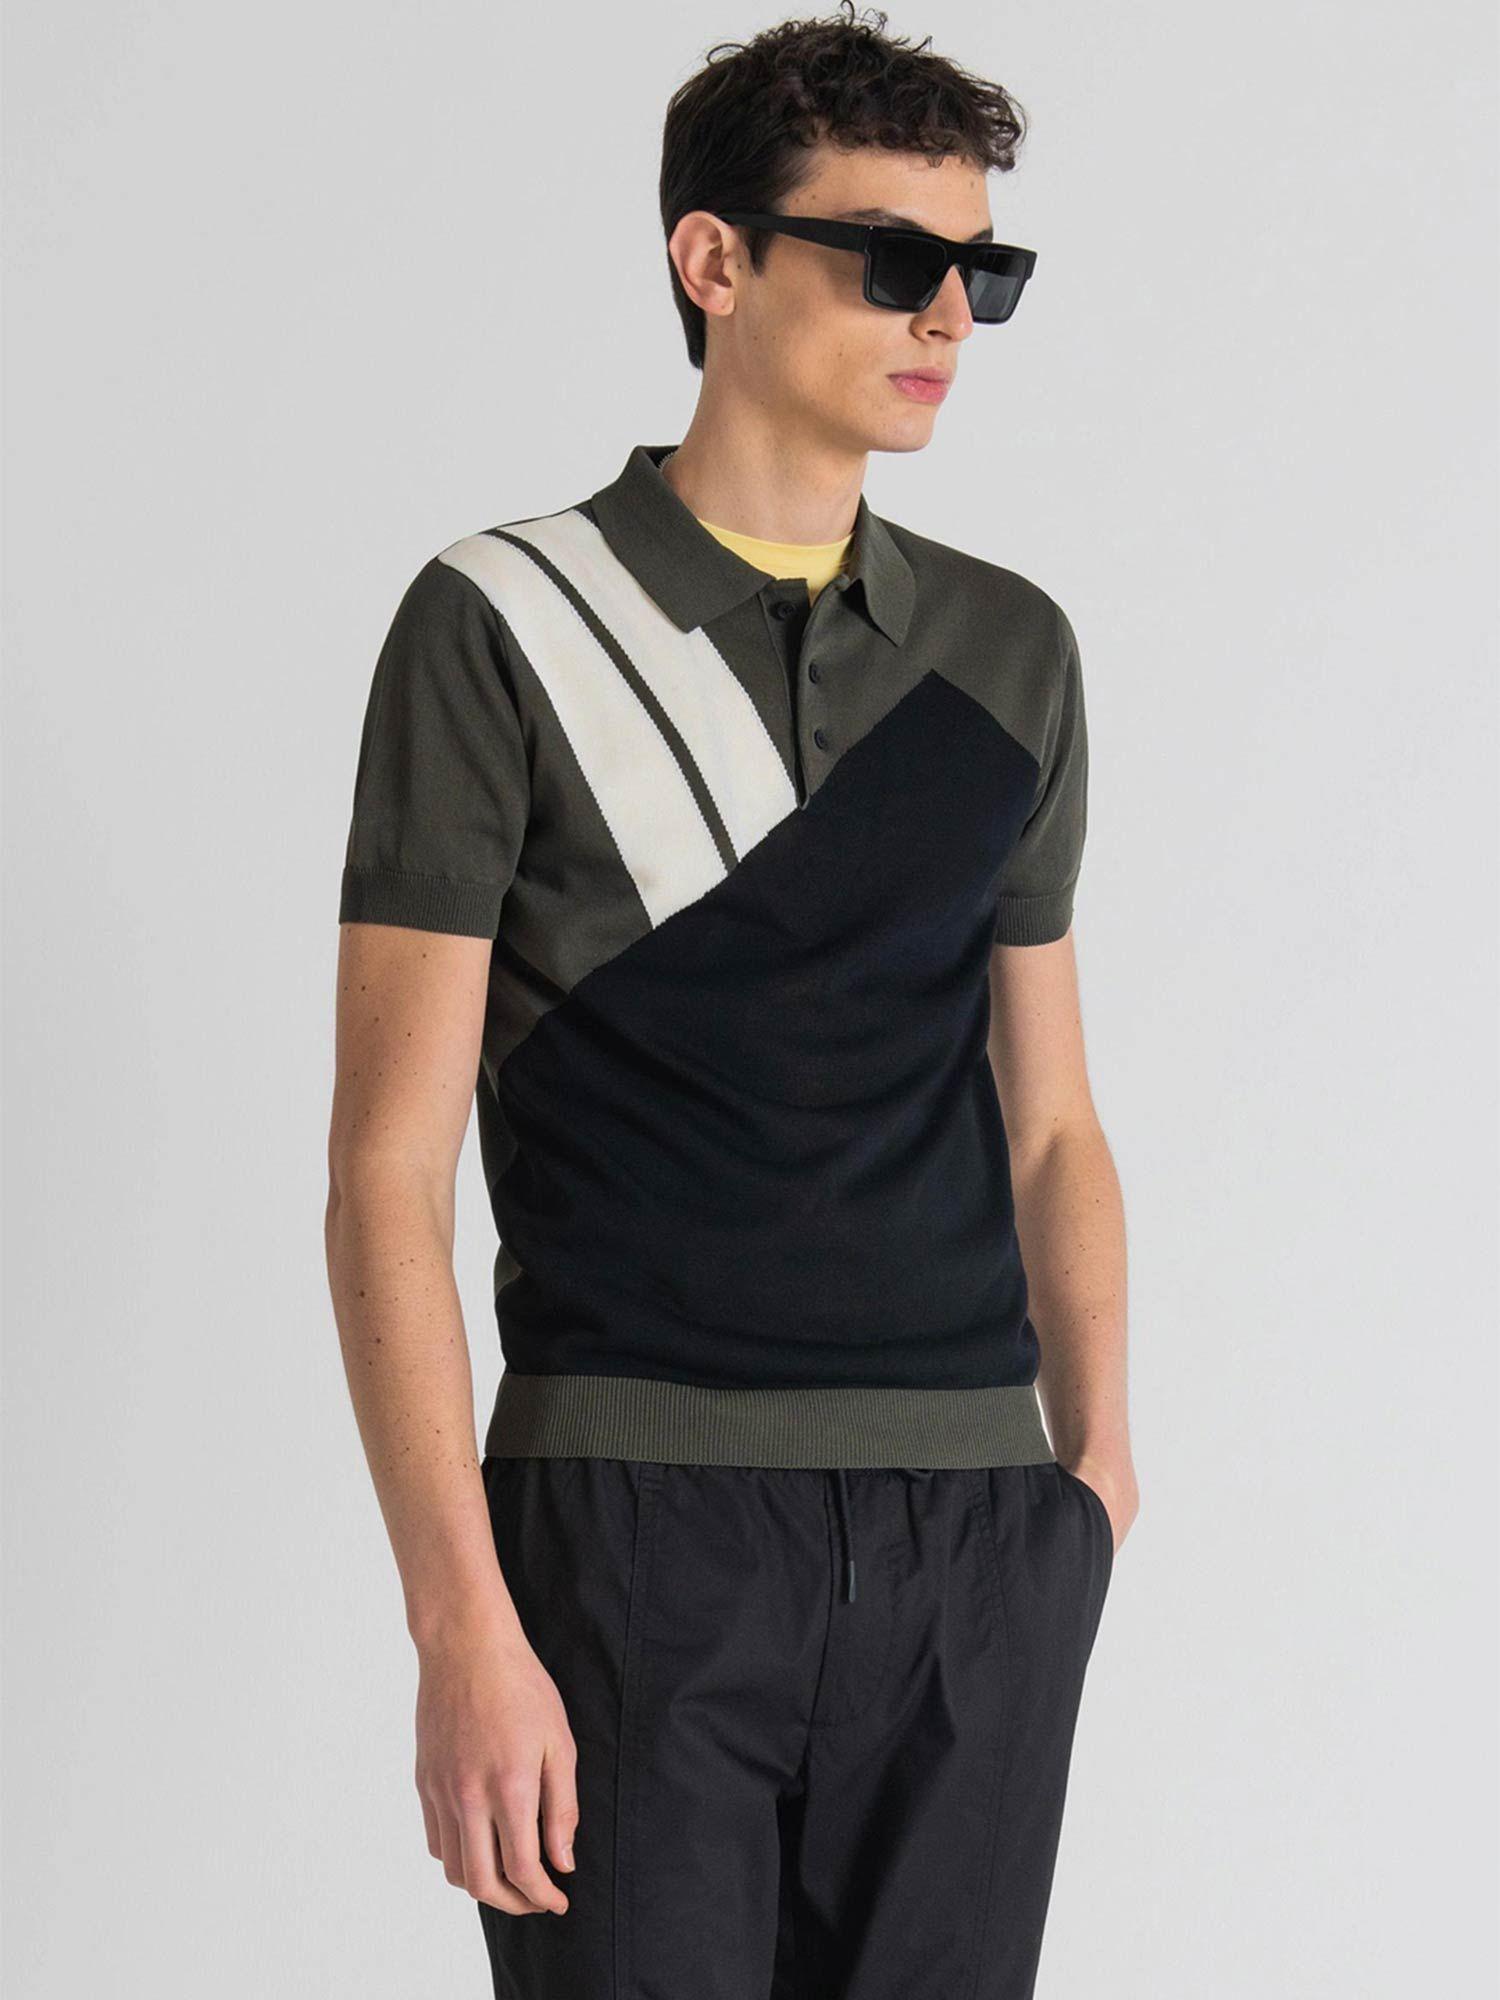 slim fit olive sweater in viscose blend yarn with colorblock jacquard pattern